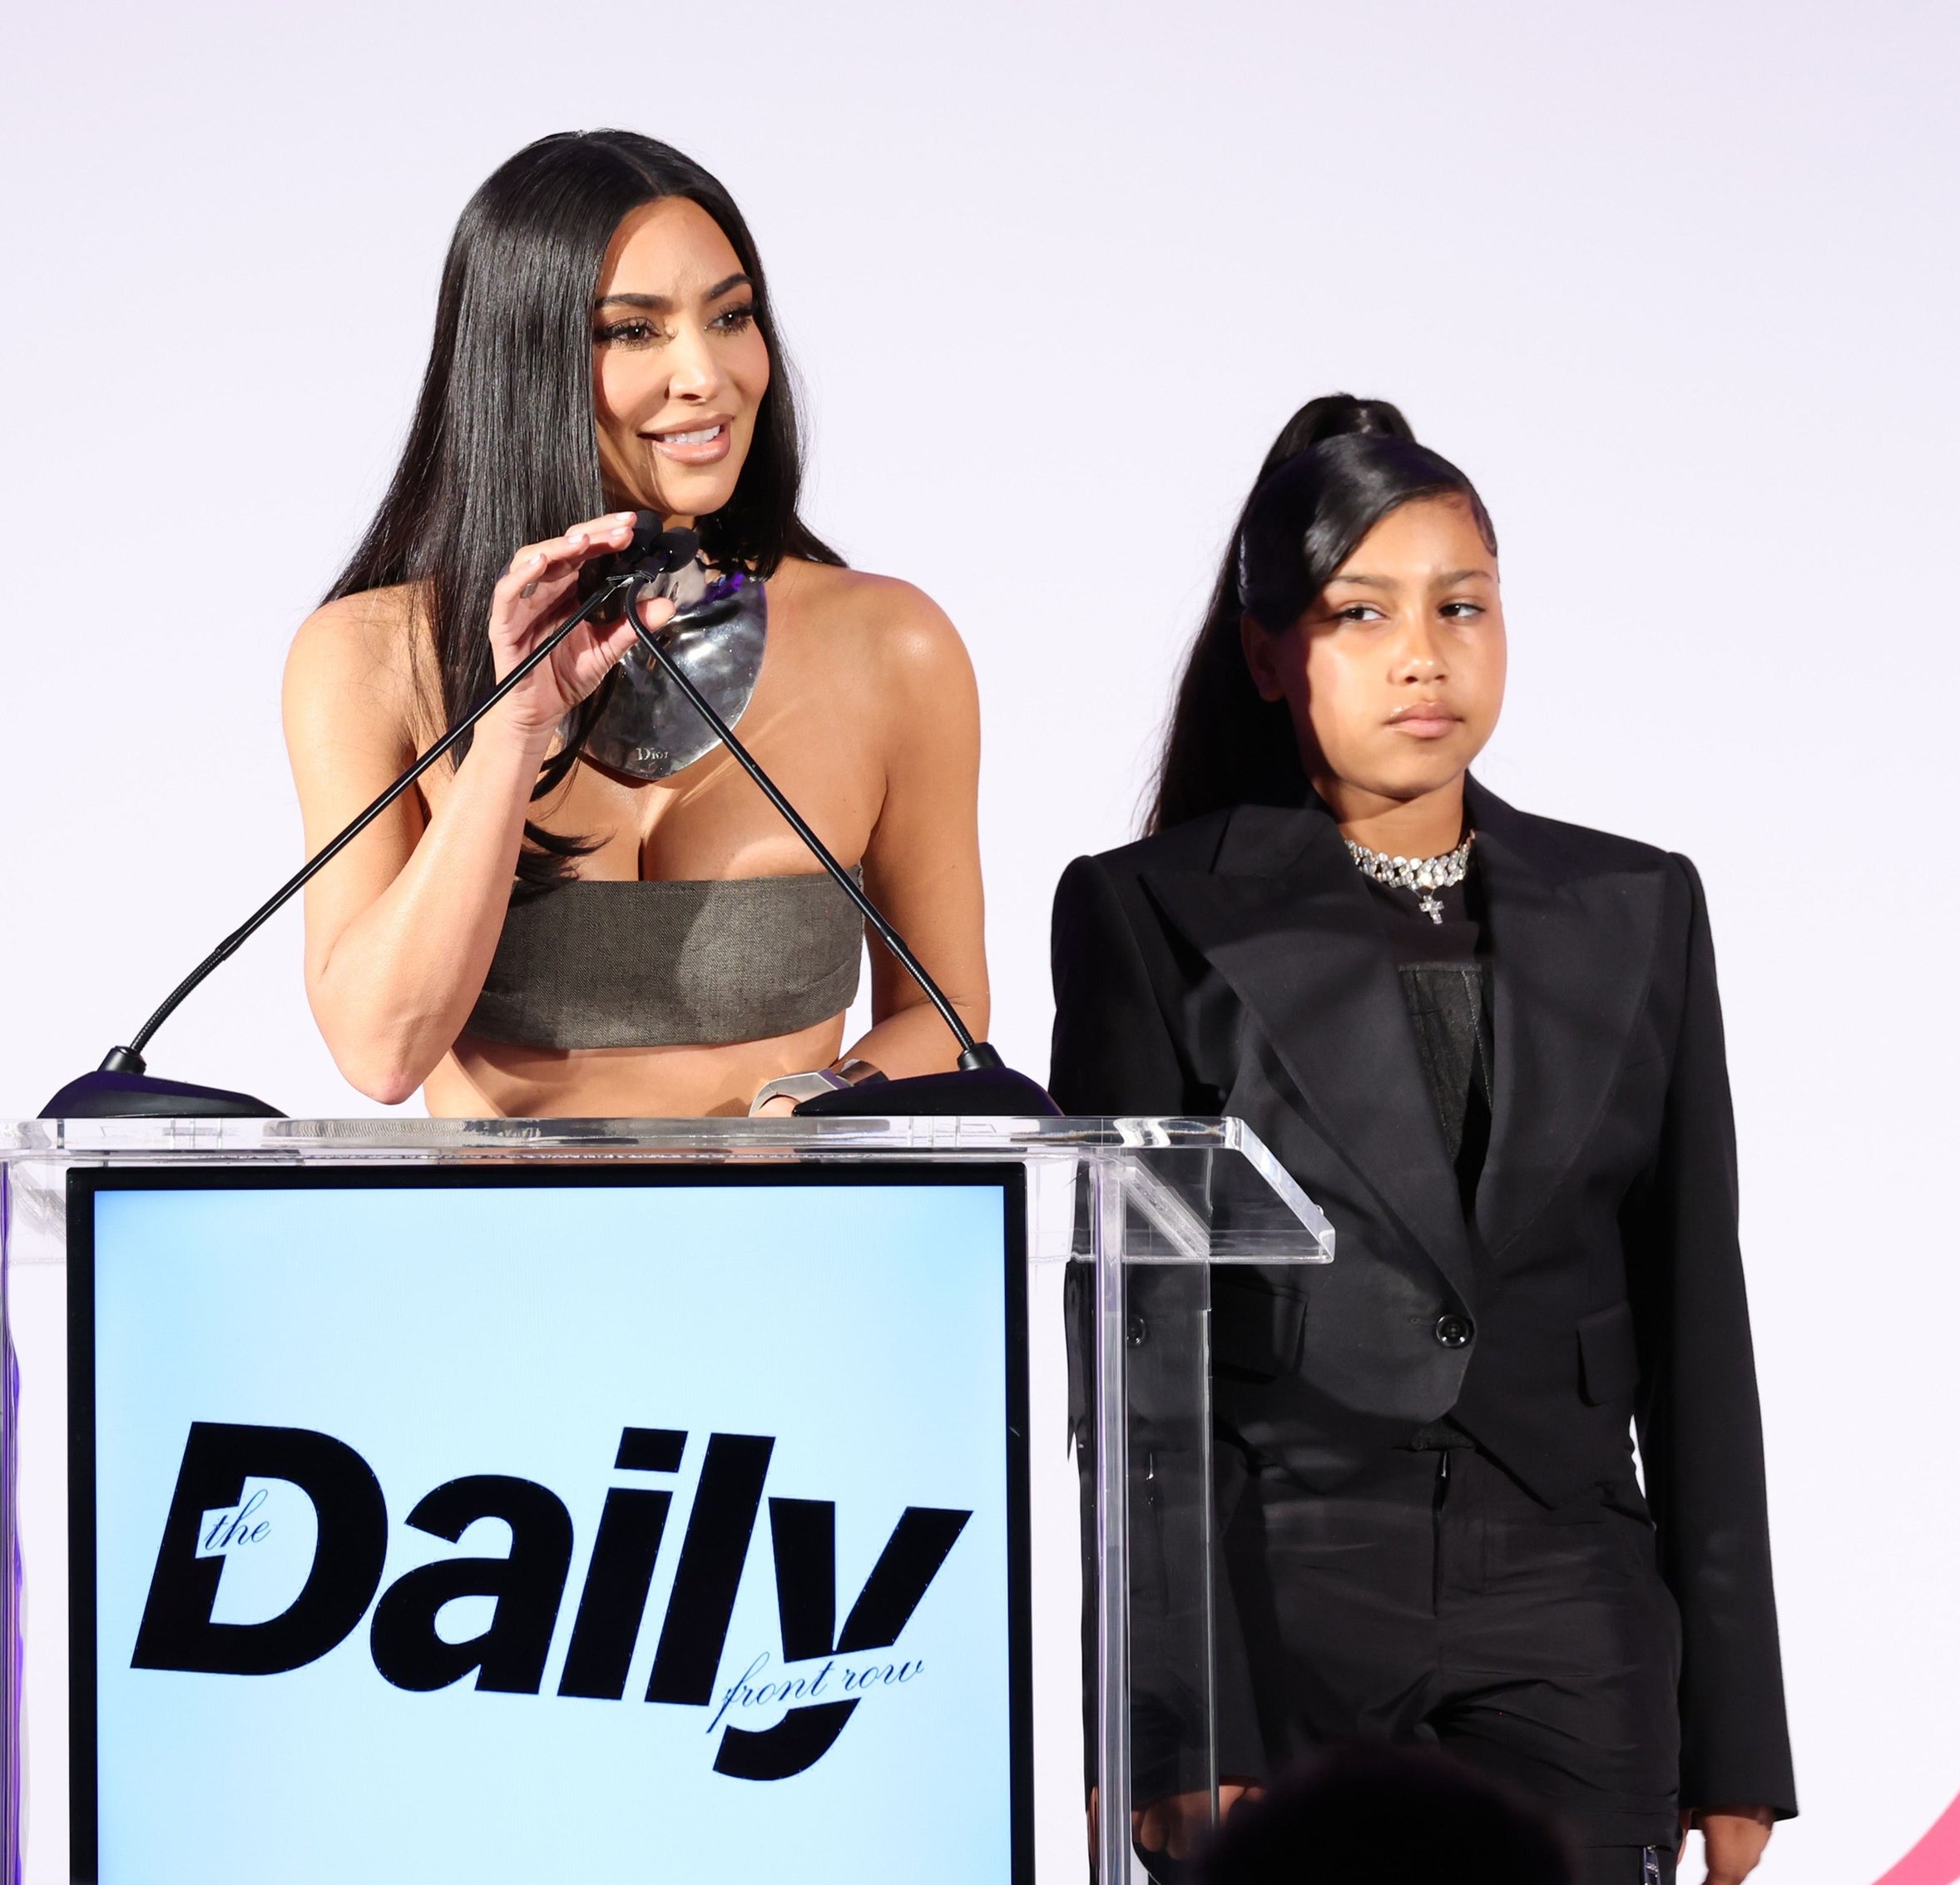 Kim at a podium with North standing next to her